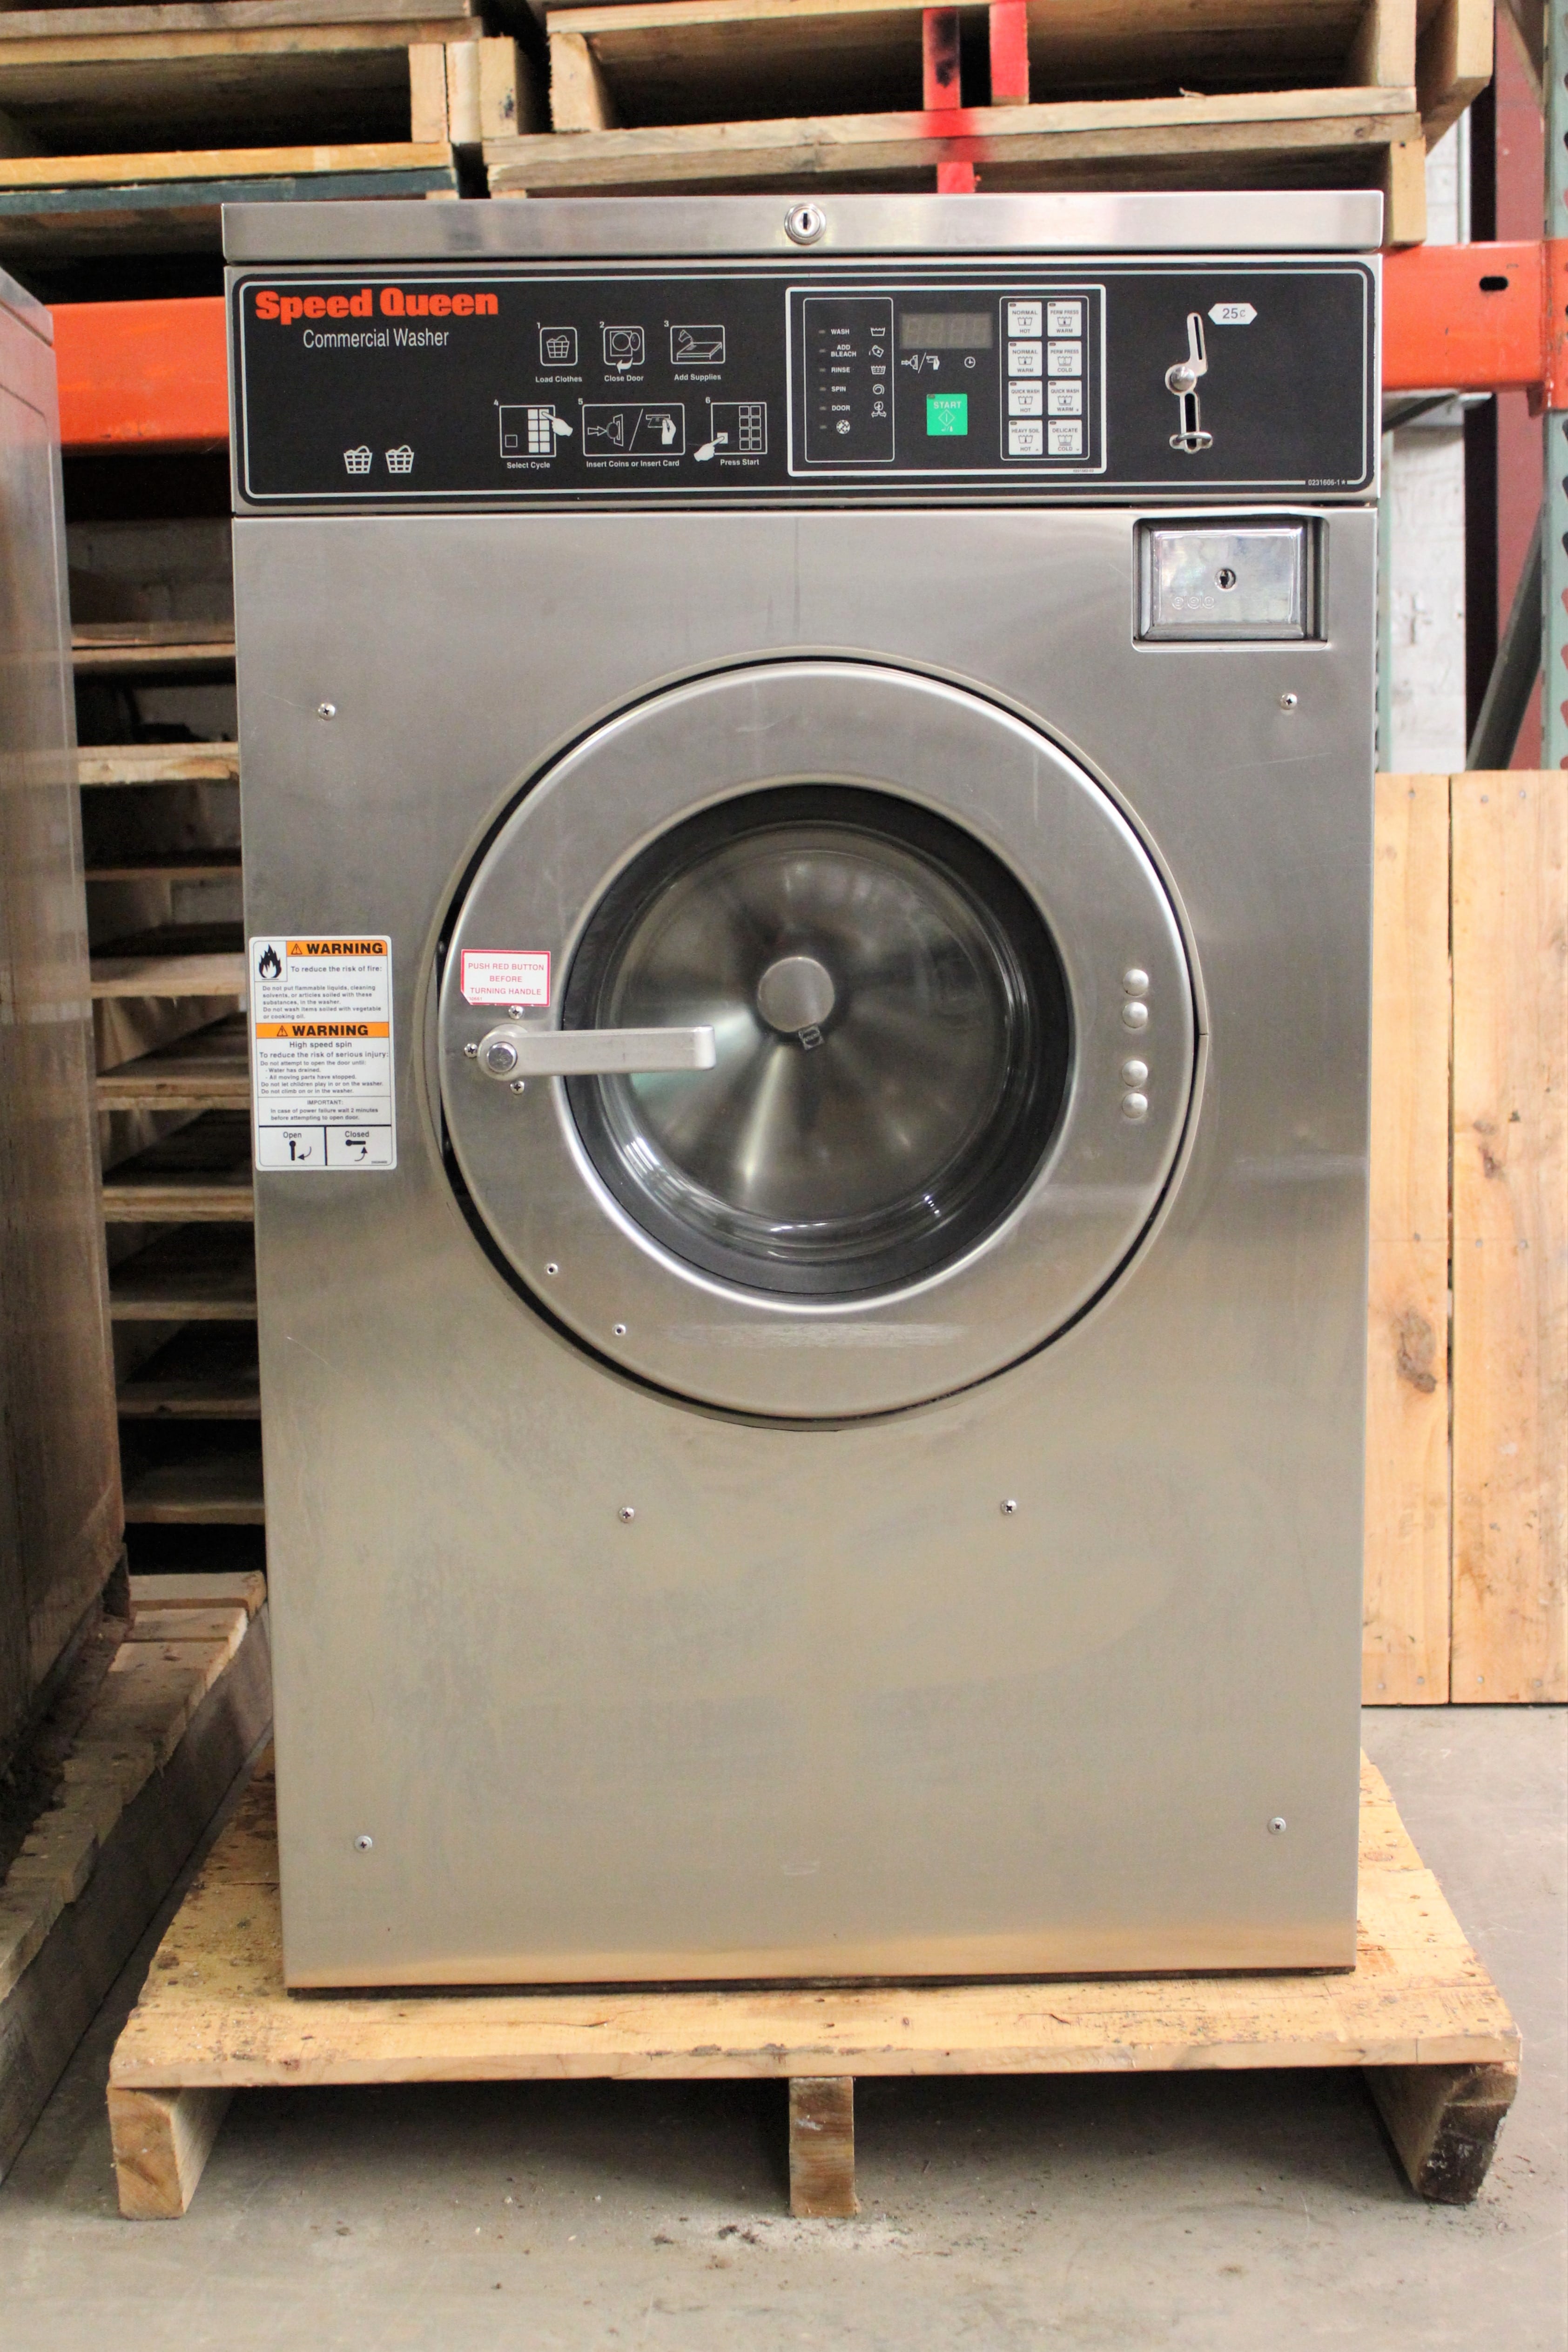 Used 20lb Speed Queen Coin-Operated Washer SC20BC - Midwest